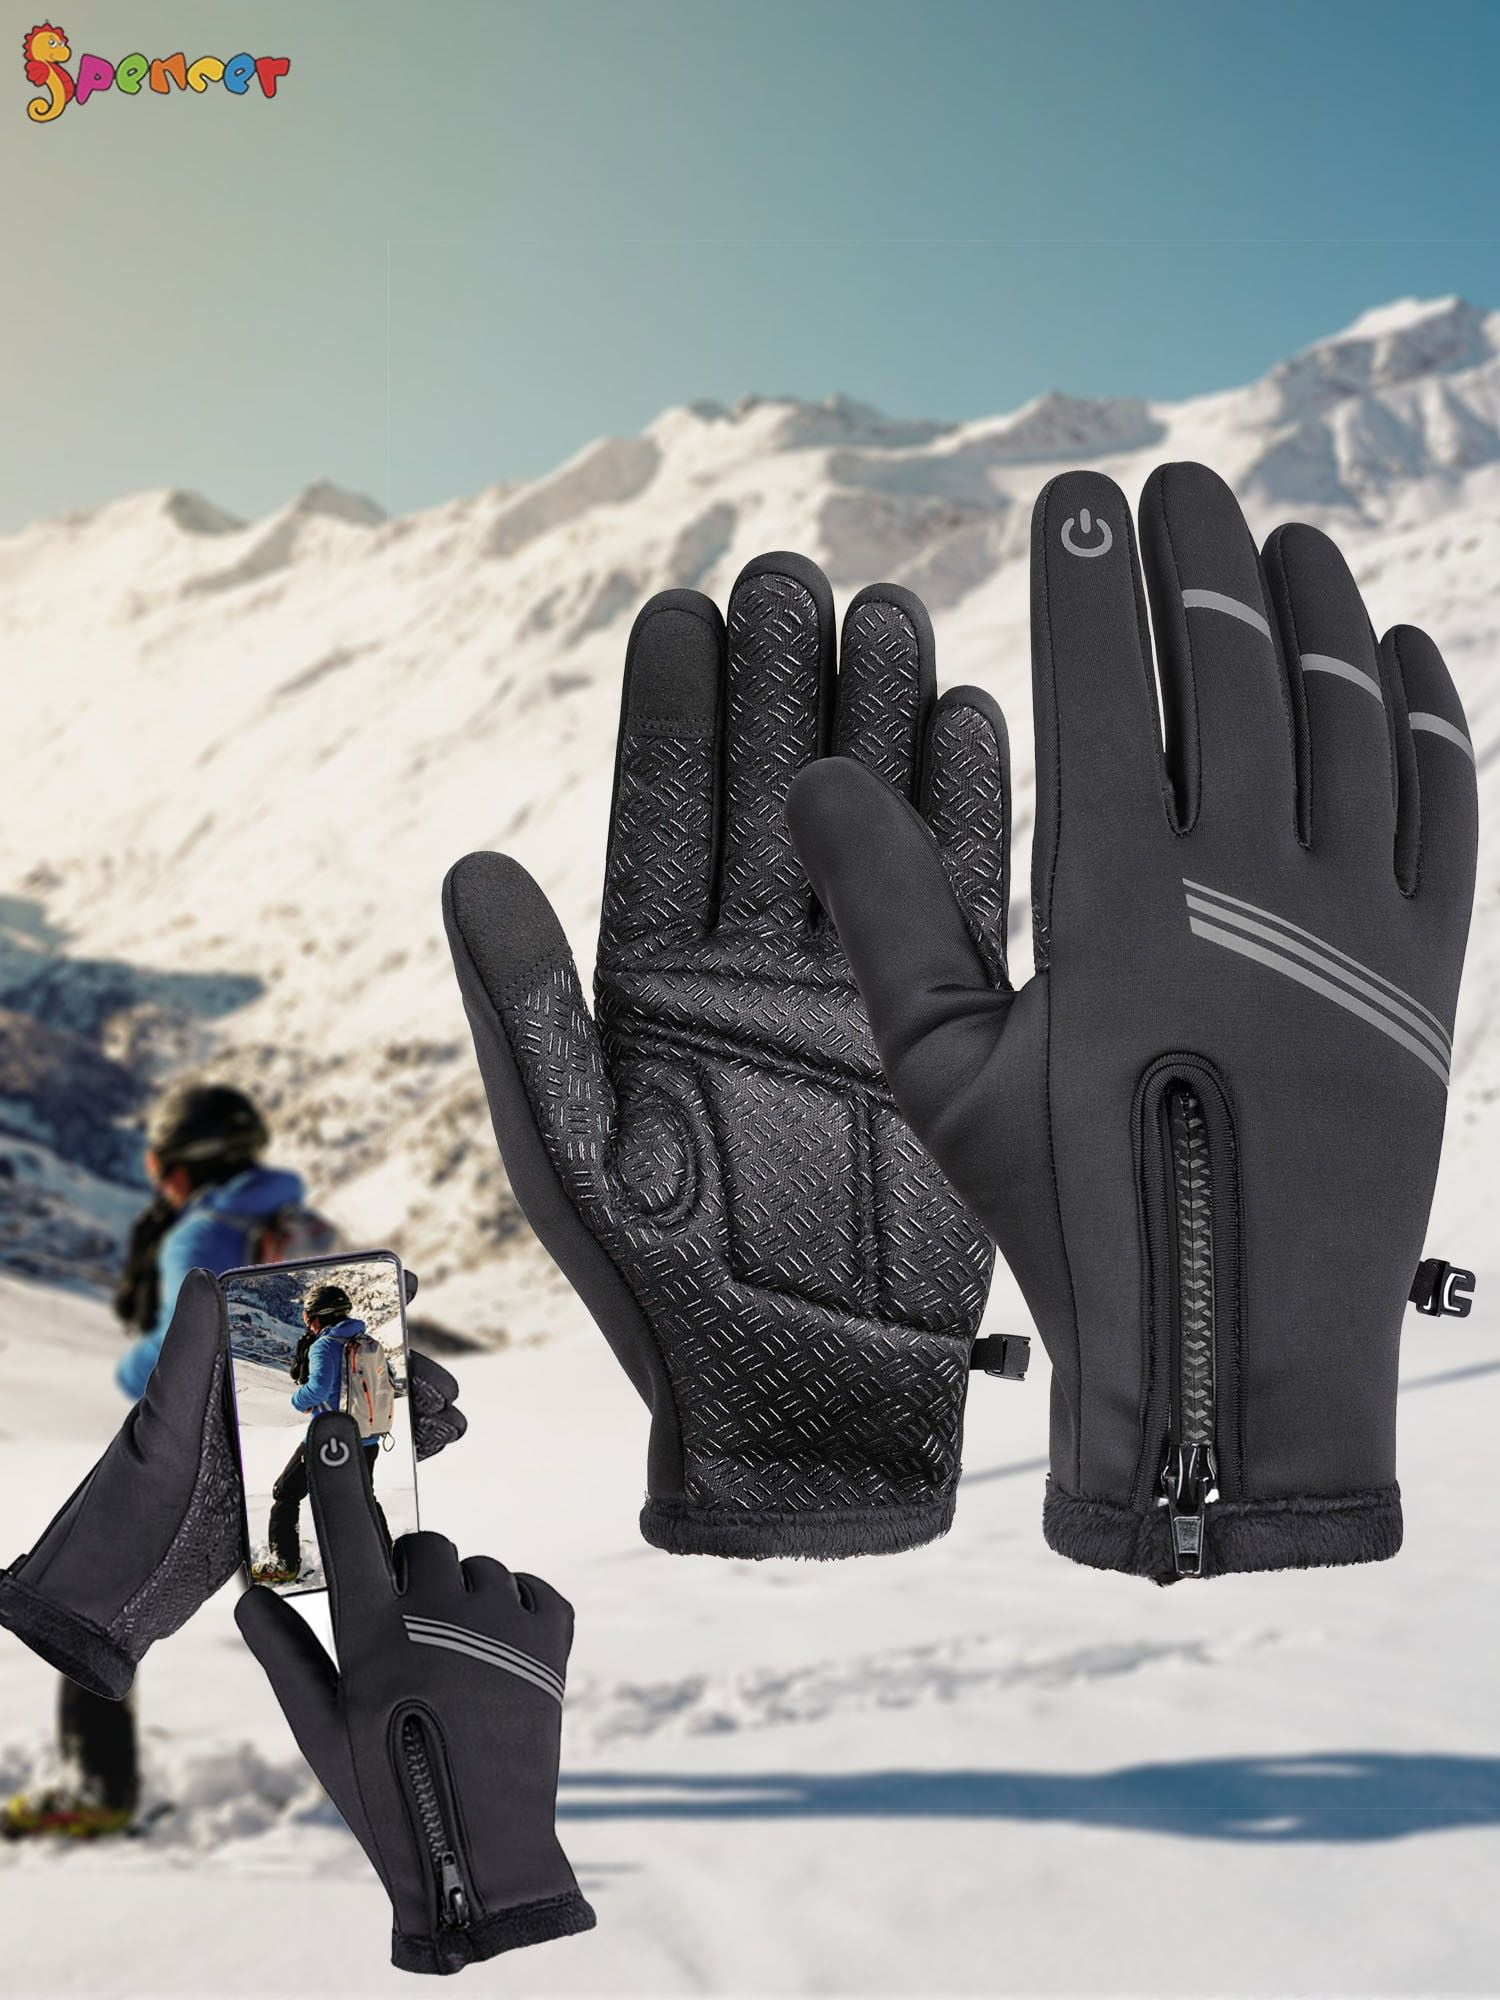 YFINE Winter Warm Gloves Touch Screen Waterproof And Windproof Zipper Adjustment Gloves For Men And Women Cycling Skiing Climbing Motorcycling Hiking